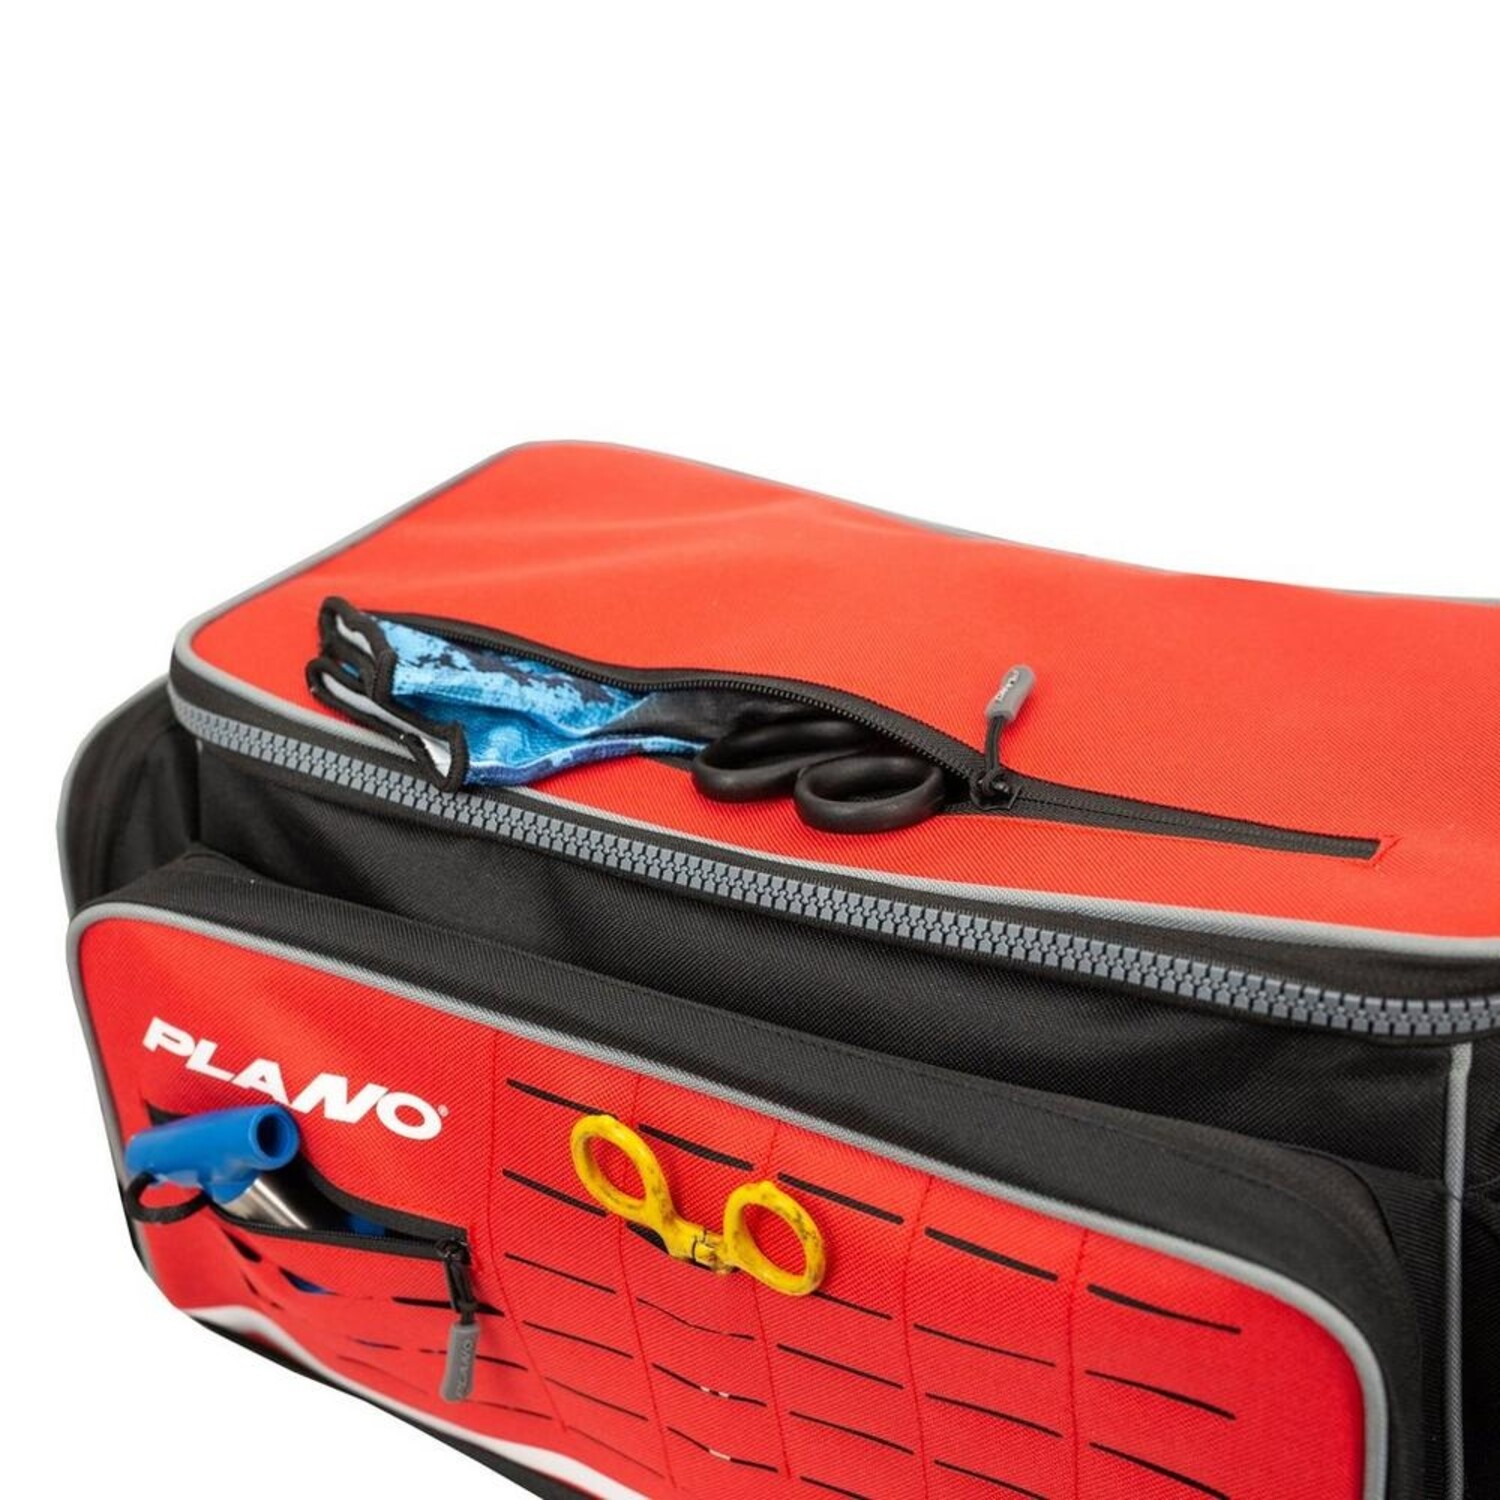 Plano Weekend Series Deluxe Tackle Case - Fin-atics Marine Supply Ltd. Inc.